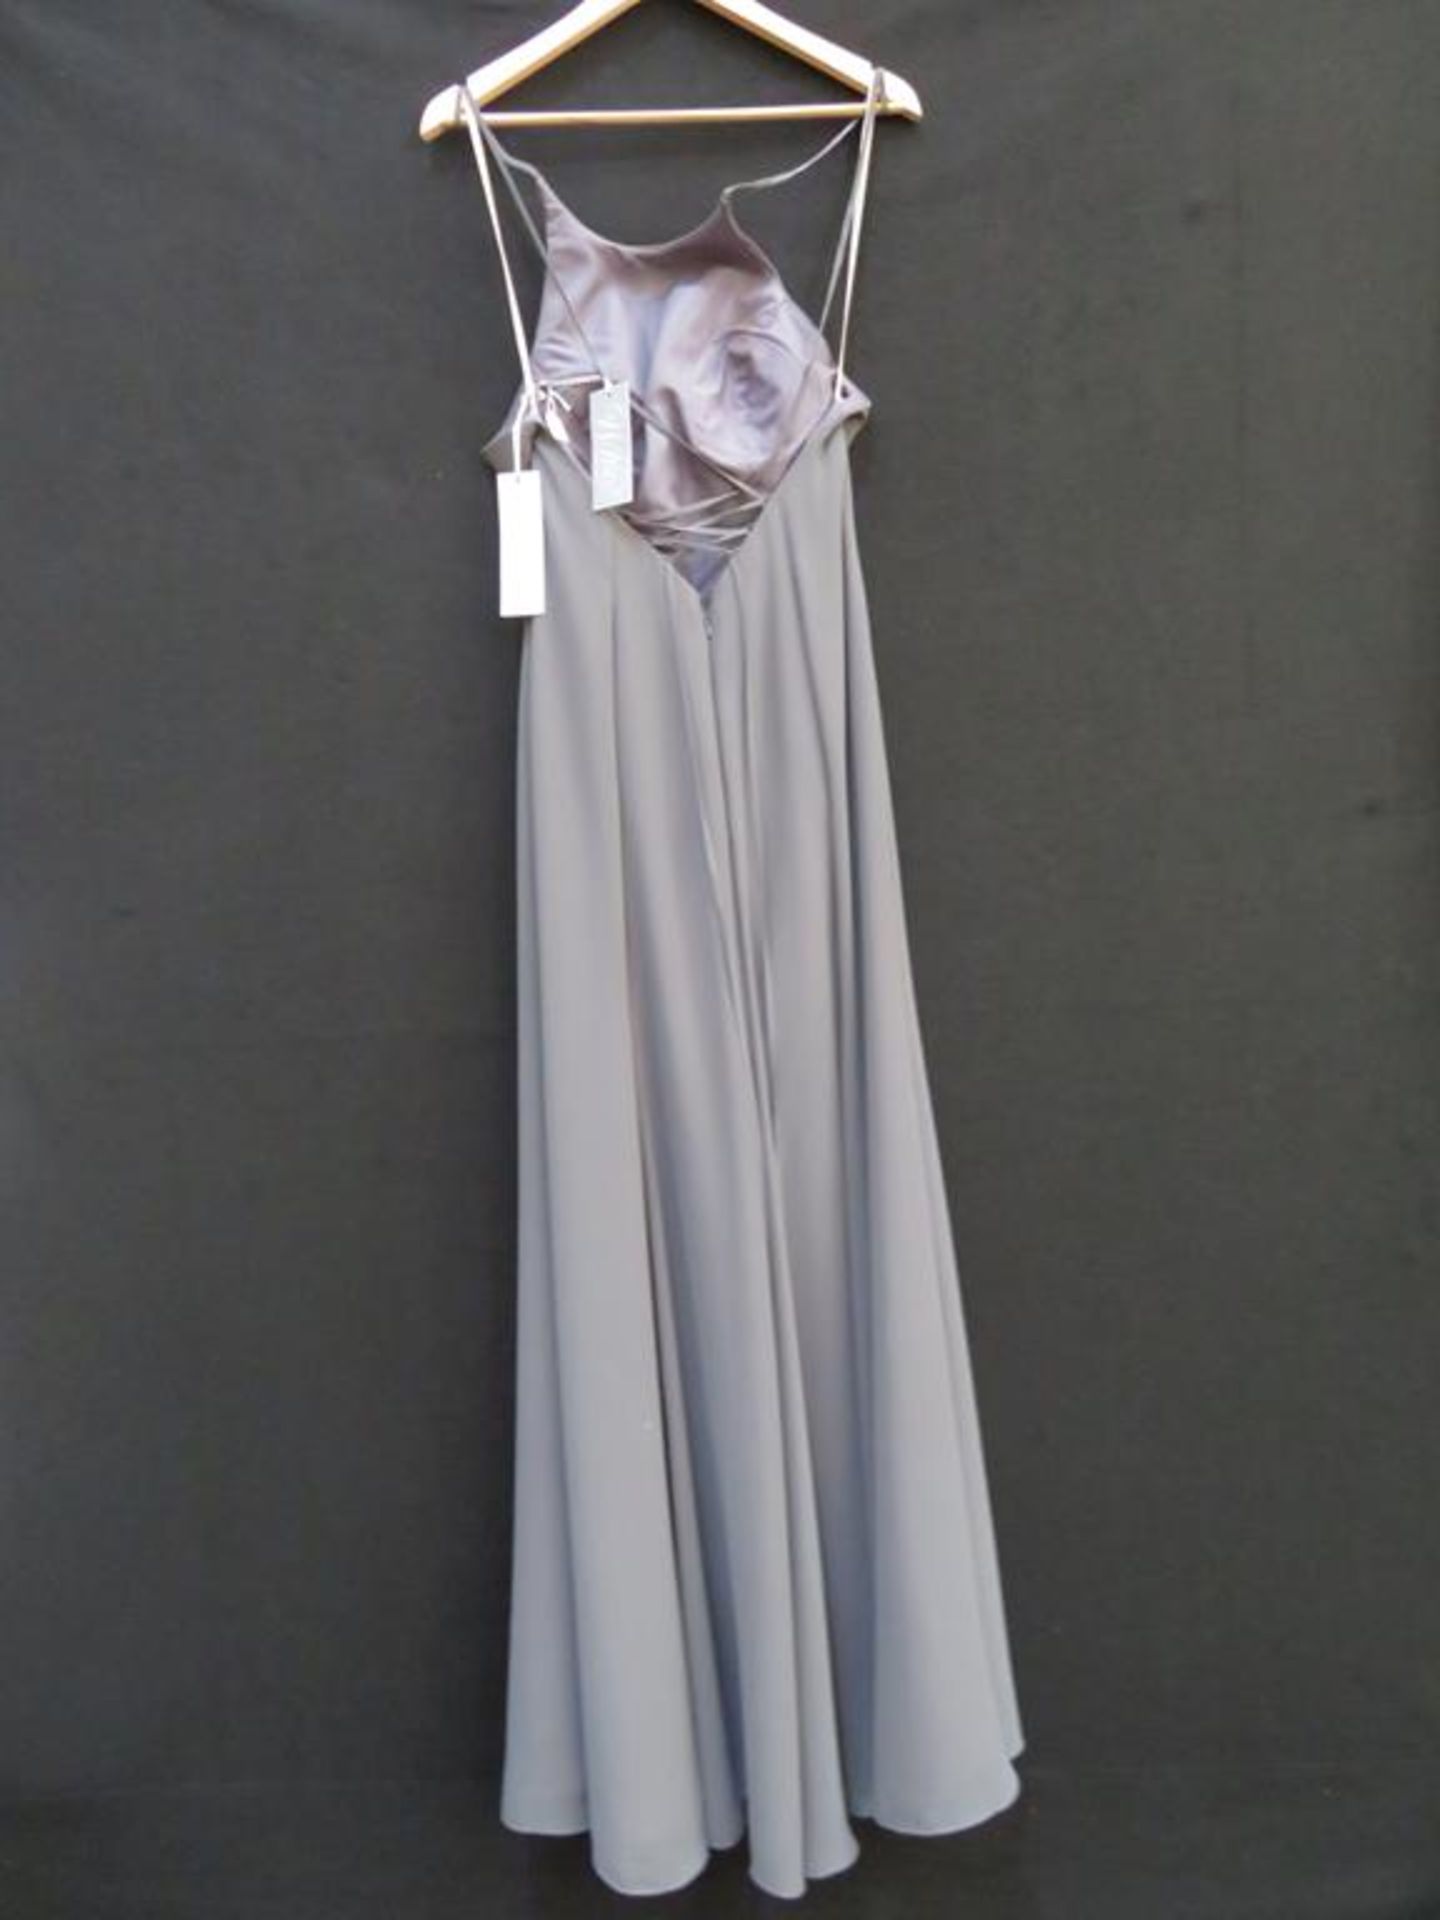 Five 'Charcoal/Pewter' Bridal Gowns in various styles - Image 4 of 29